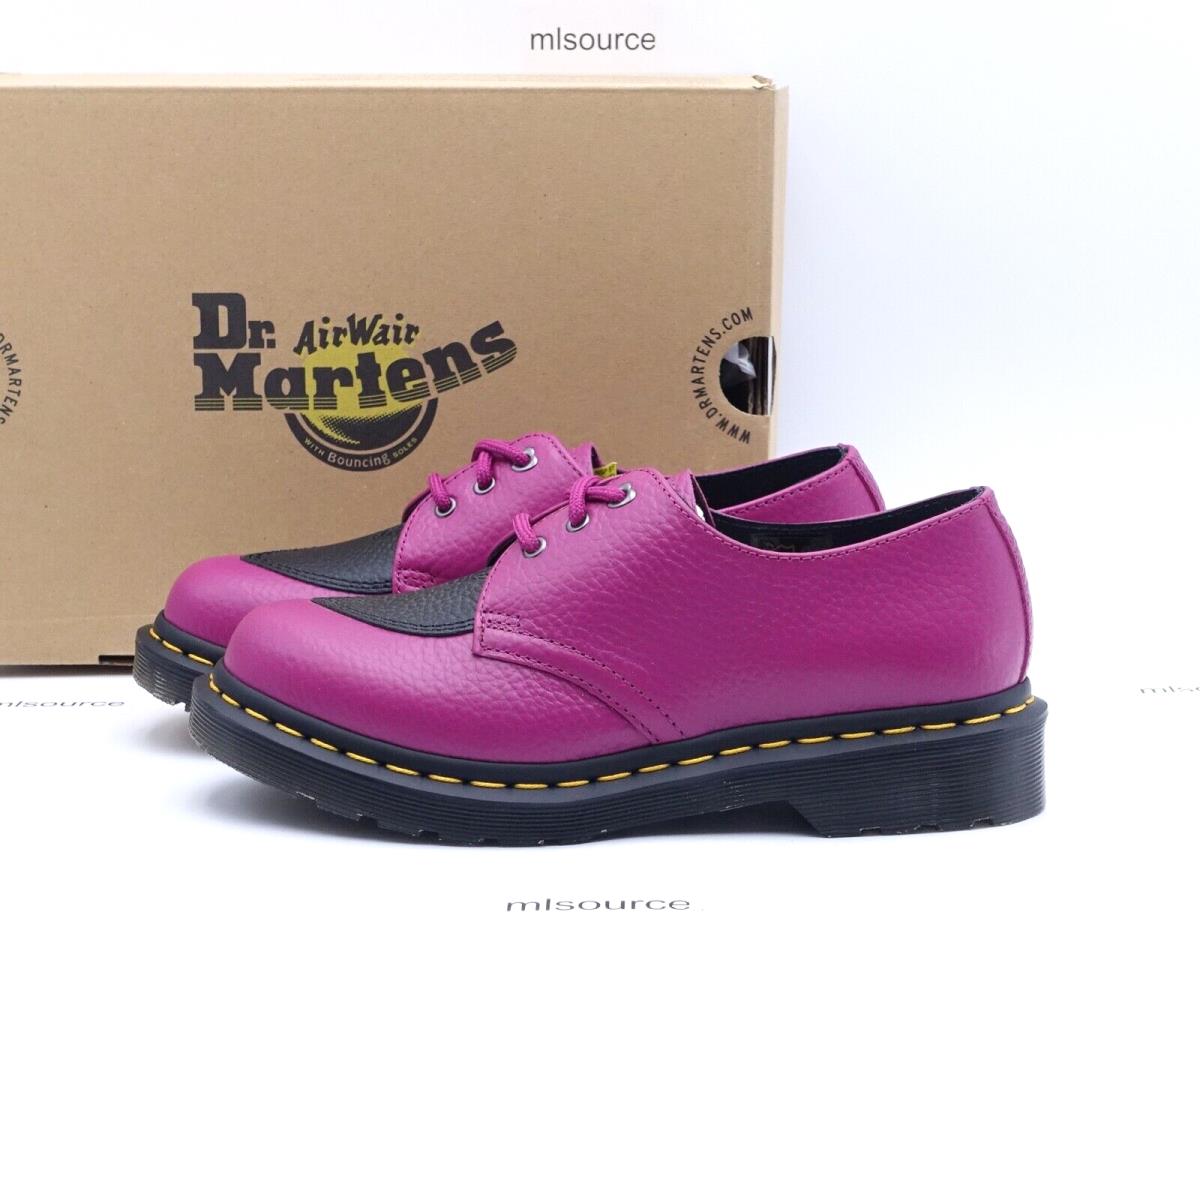 Size 6 US / UK 4 Women`s Dr. Martens 1461 Amore Leather Oxford Shoes 26965673